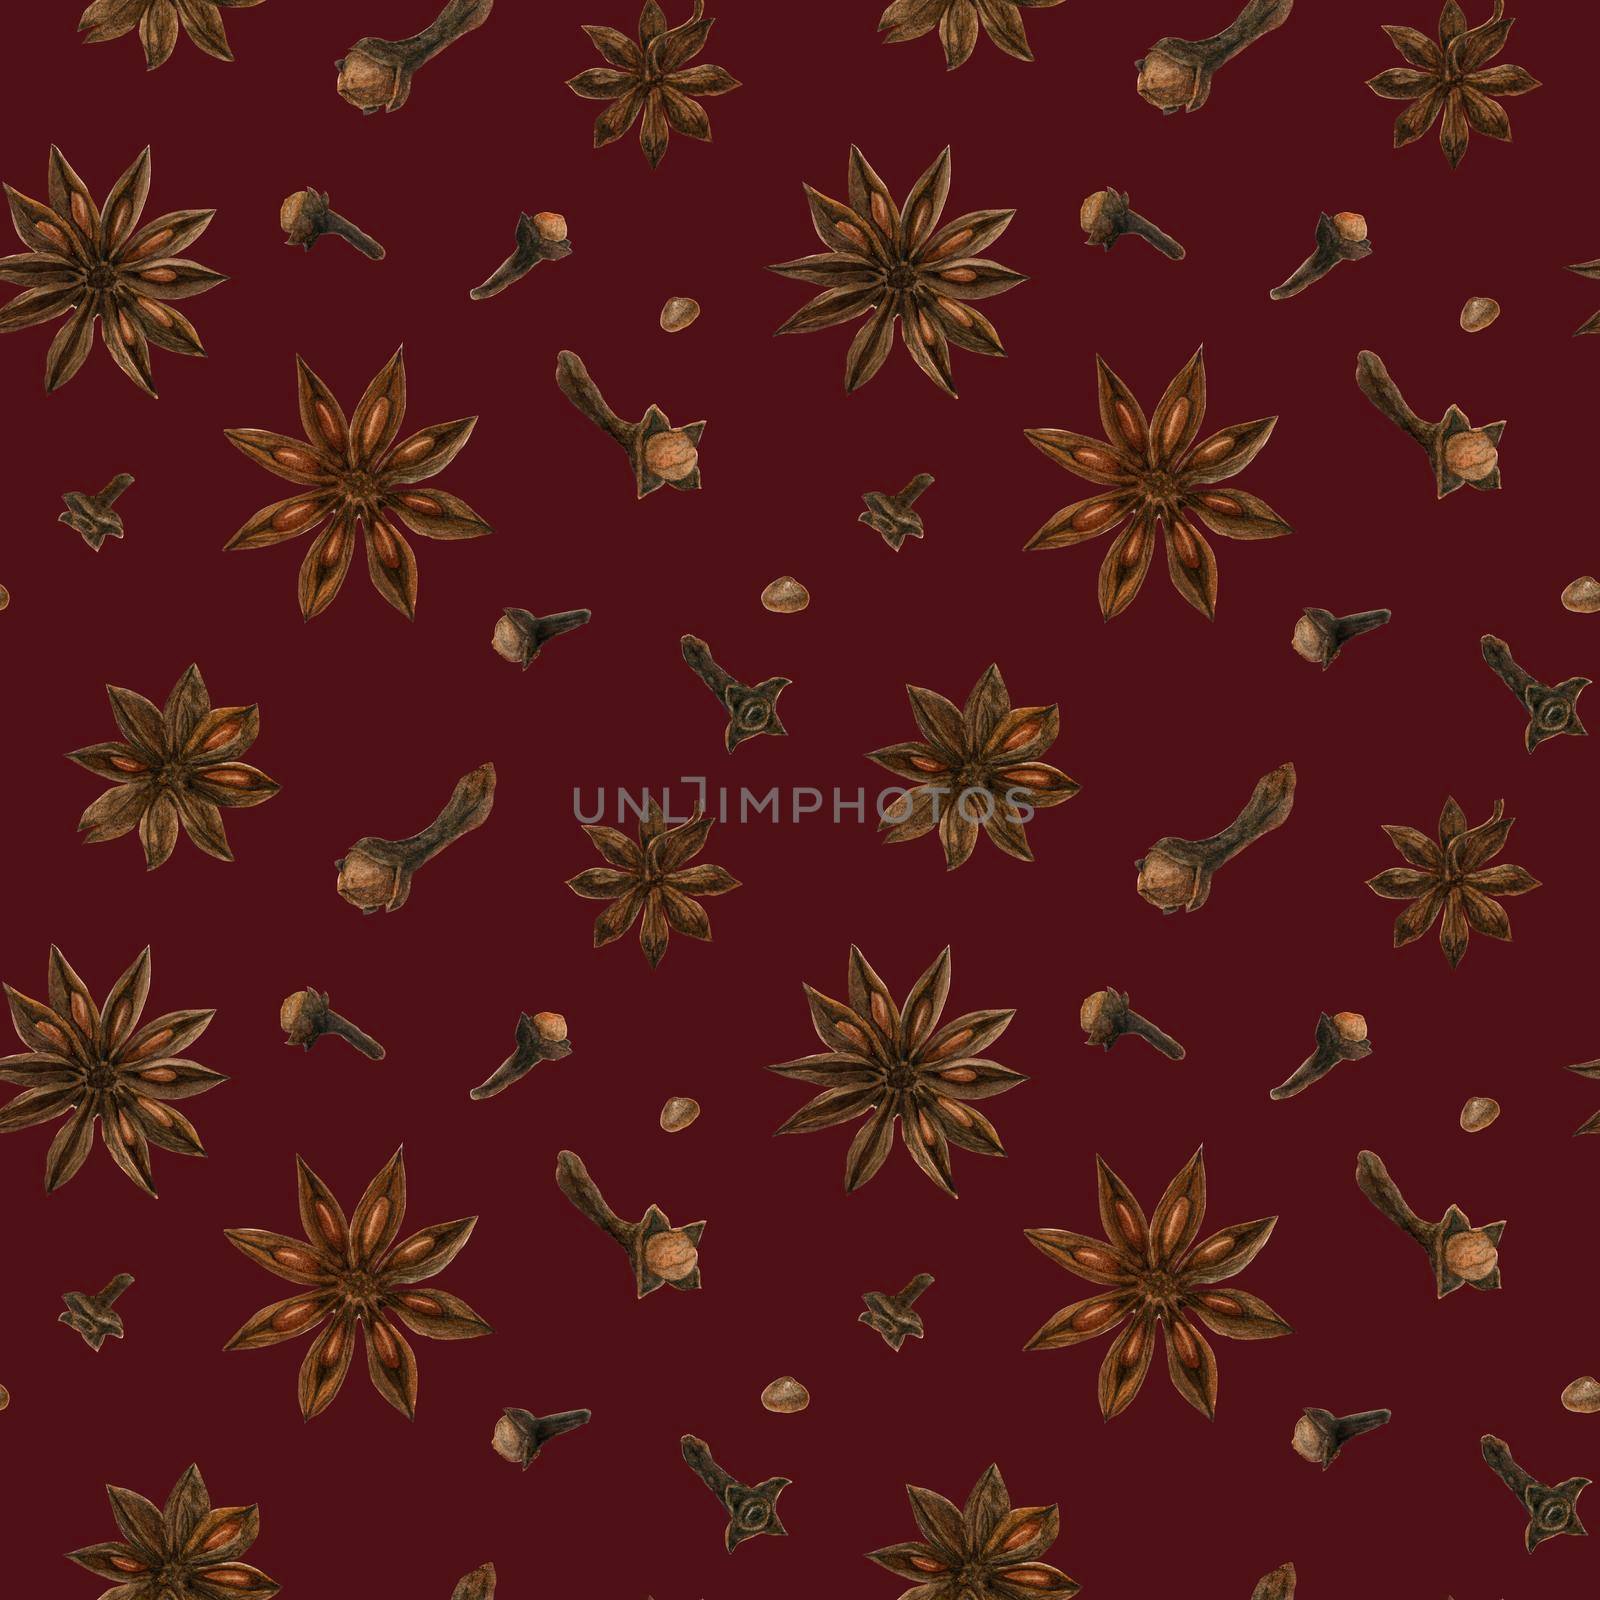 Dried cloves and star anises red seamless pattern by Xeniasnowstorm